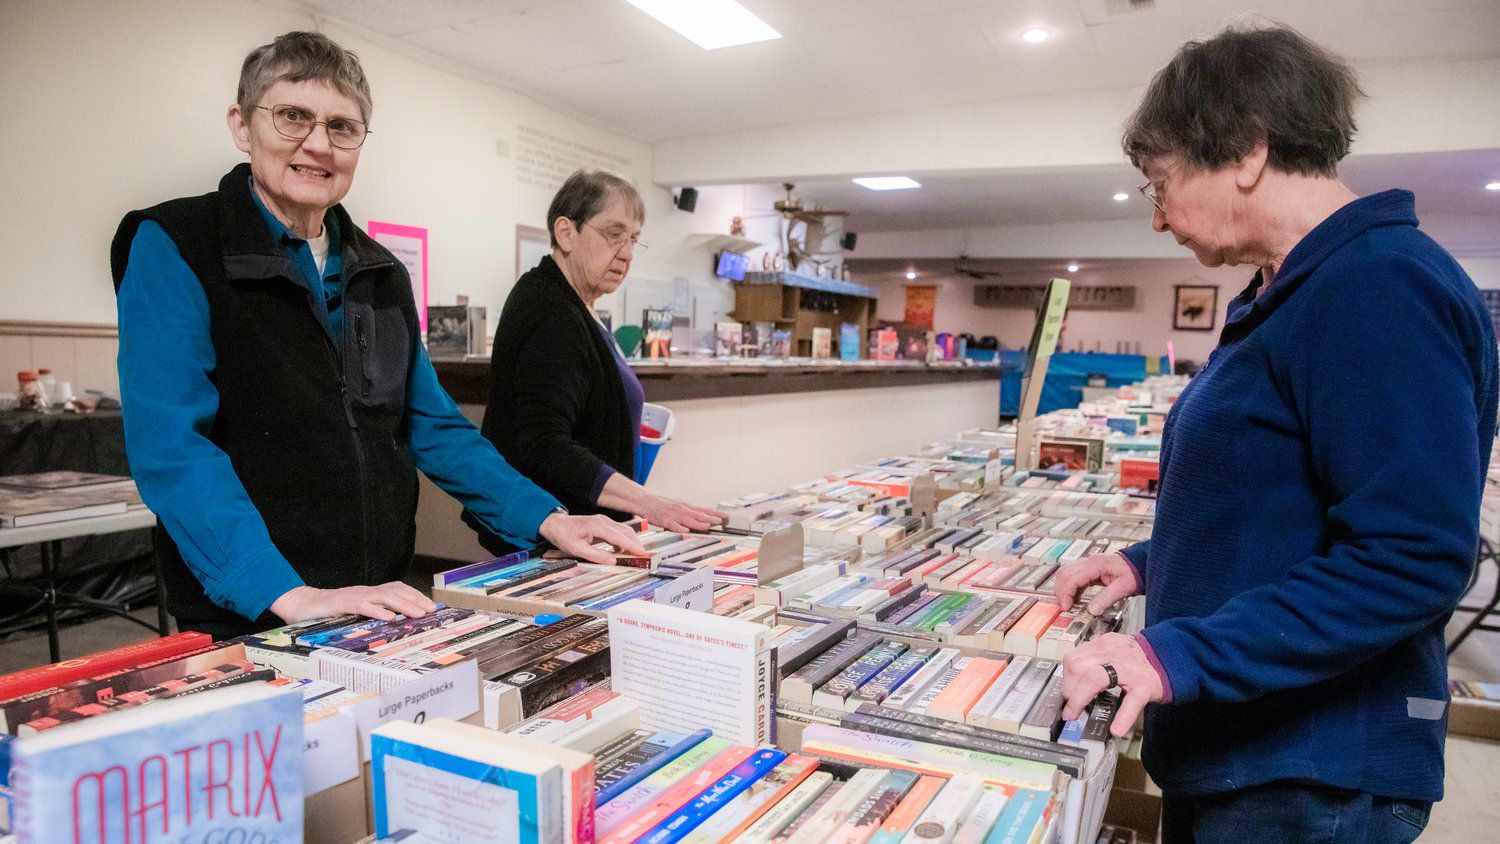 Donna Loucks, far left, talks about the history of the AAUW Used Book Sale which began over 40 years ago and is being held at the Moose Lodge in Centralia for the first time.